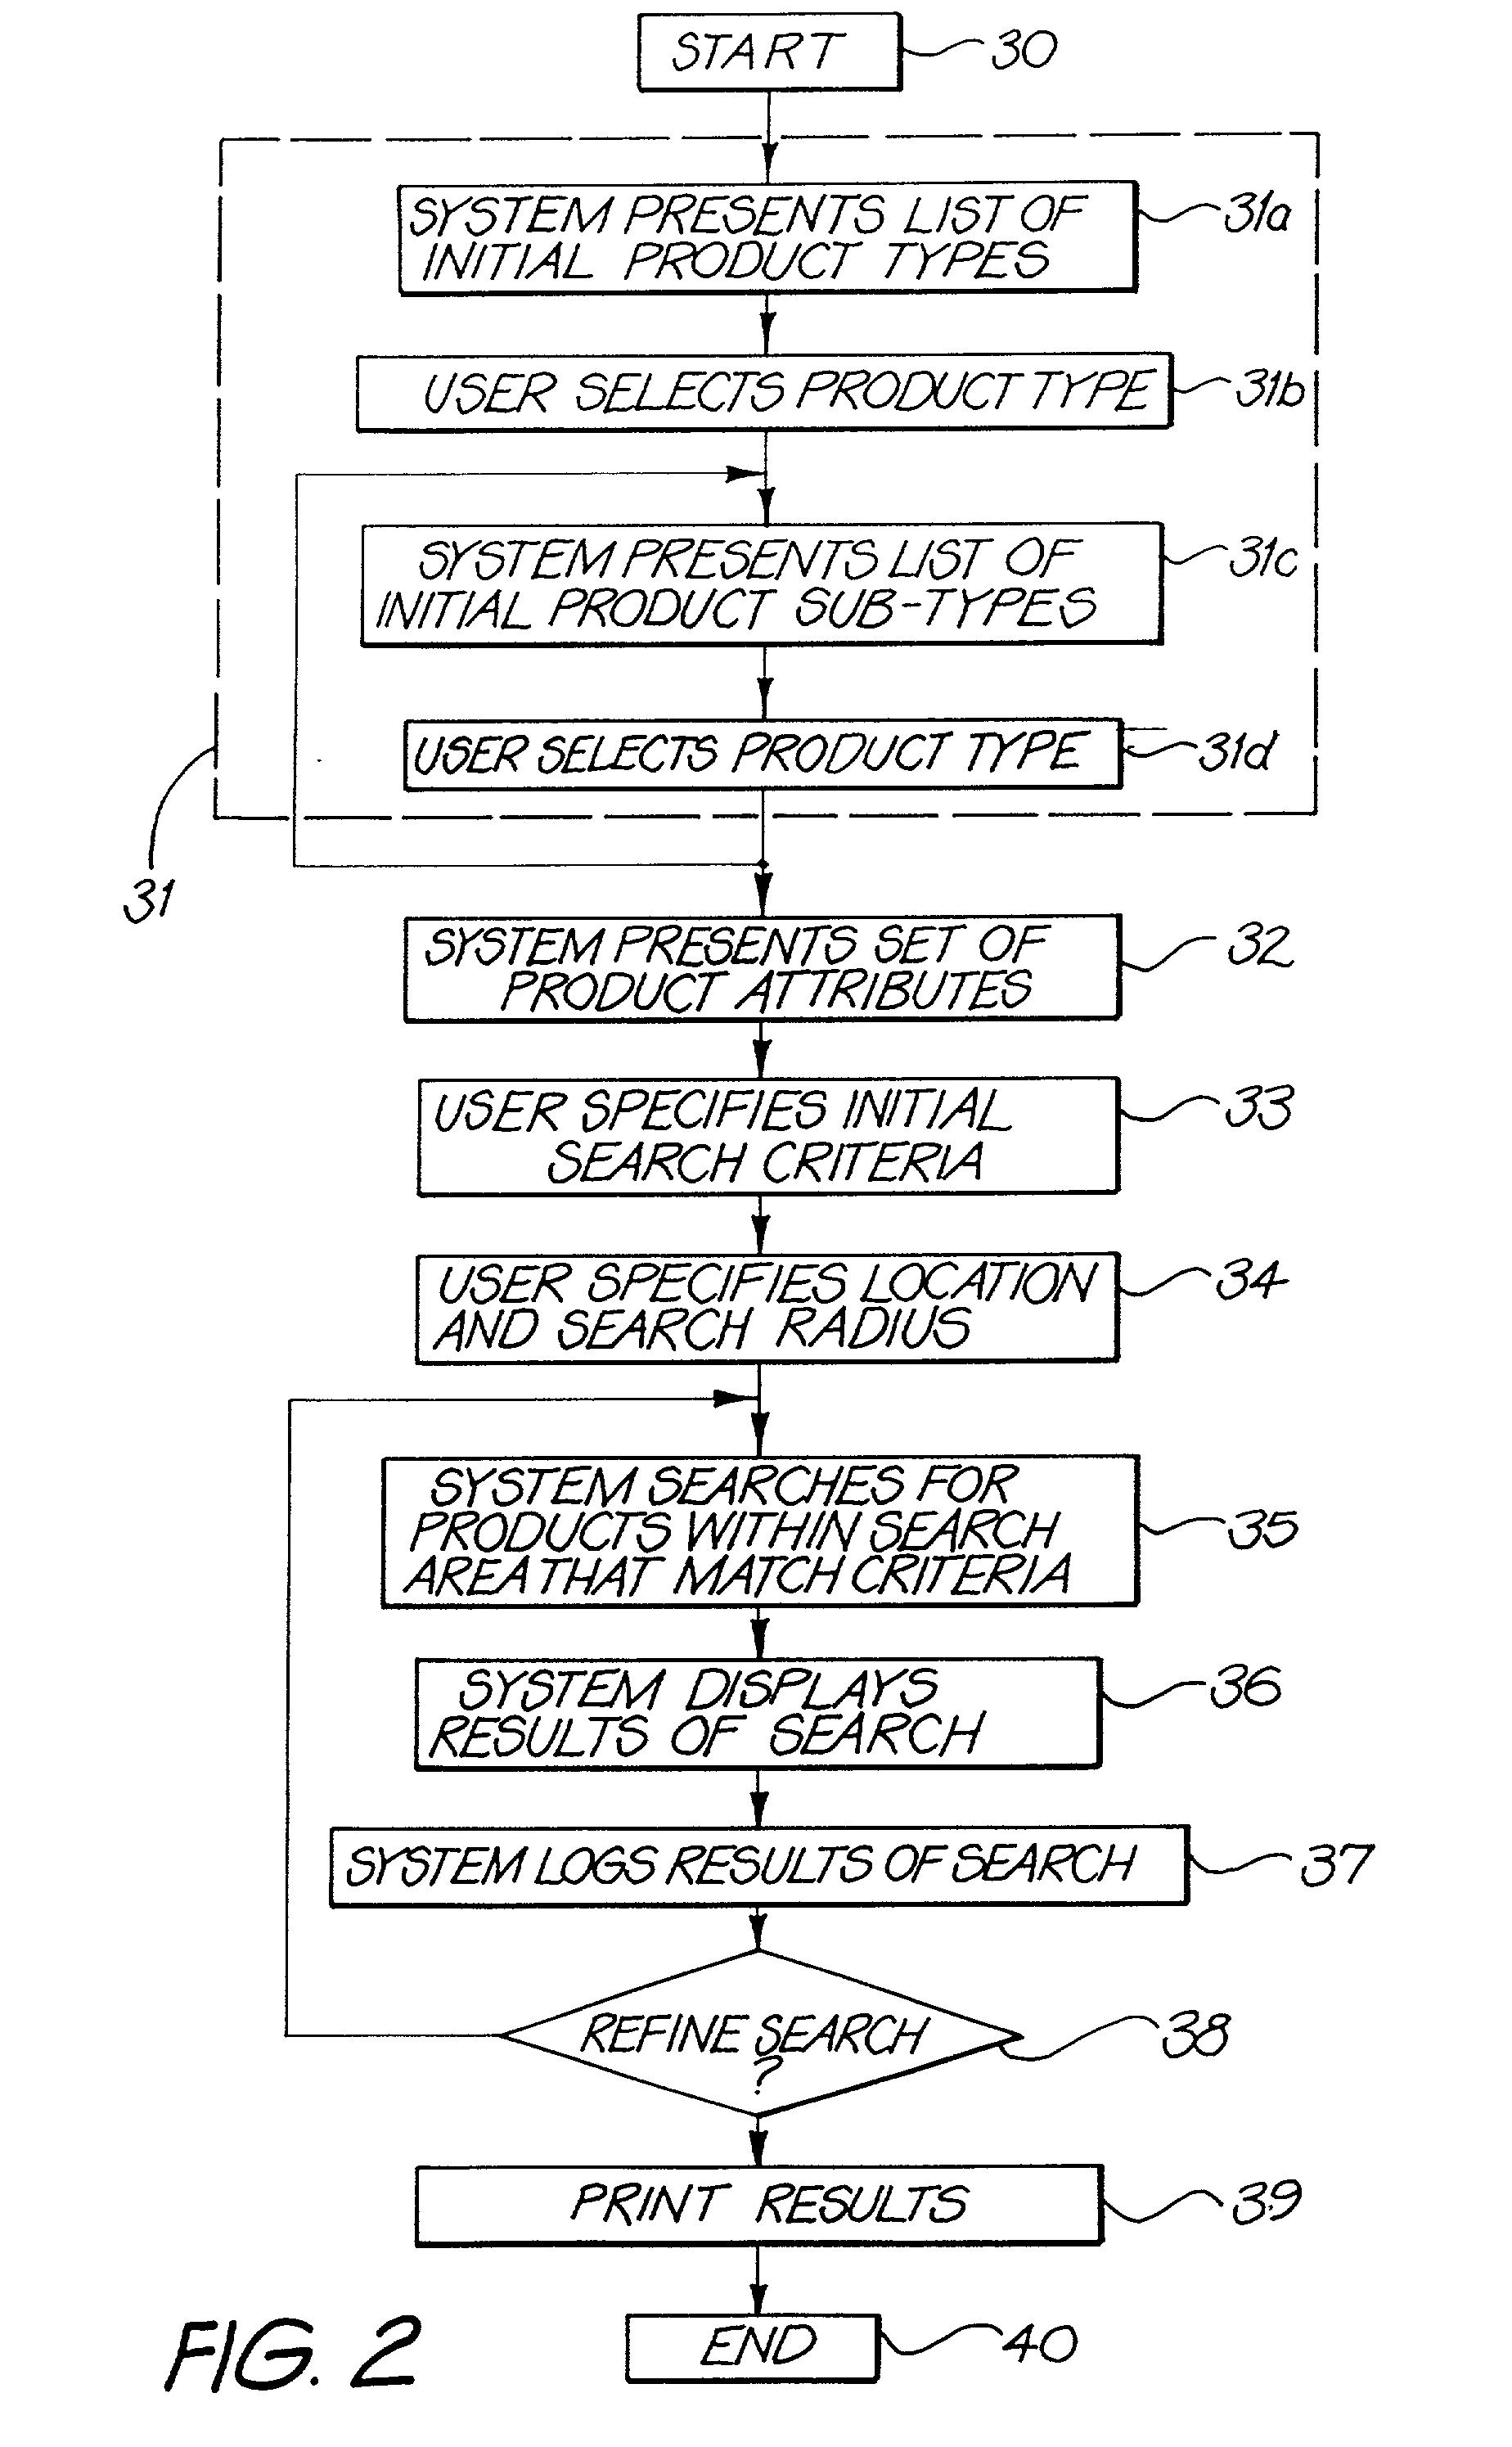 System for providing information to intending consumers